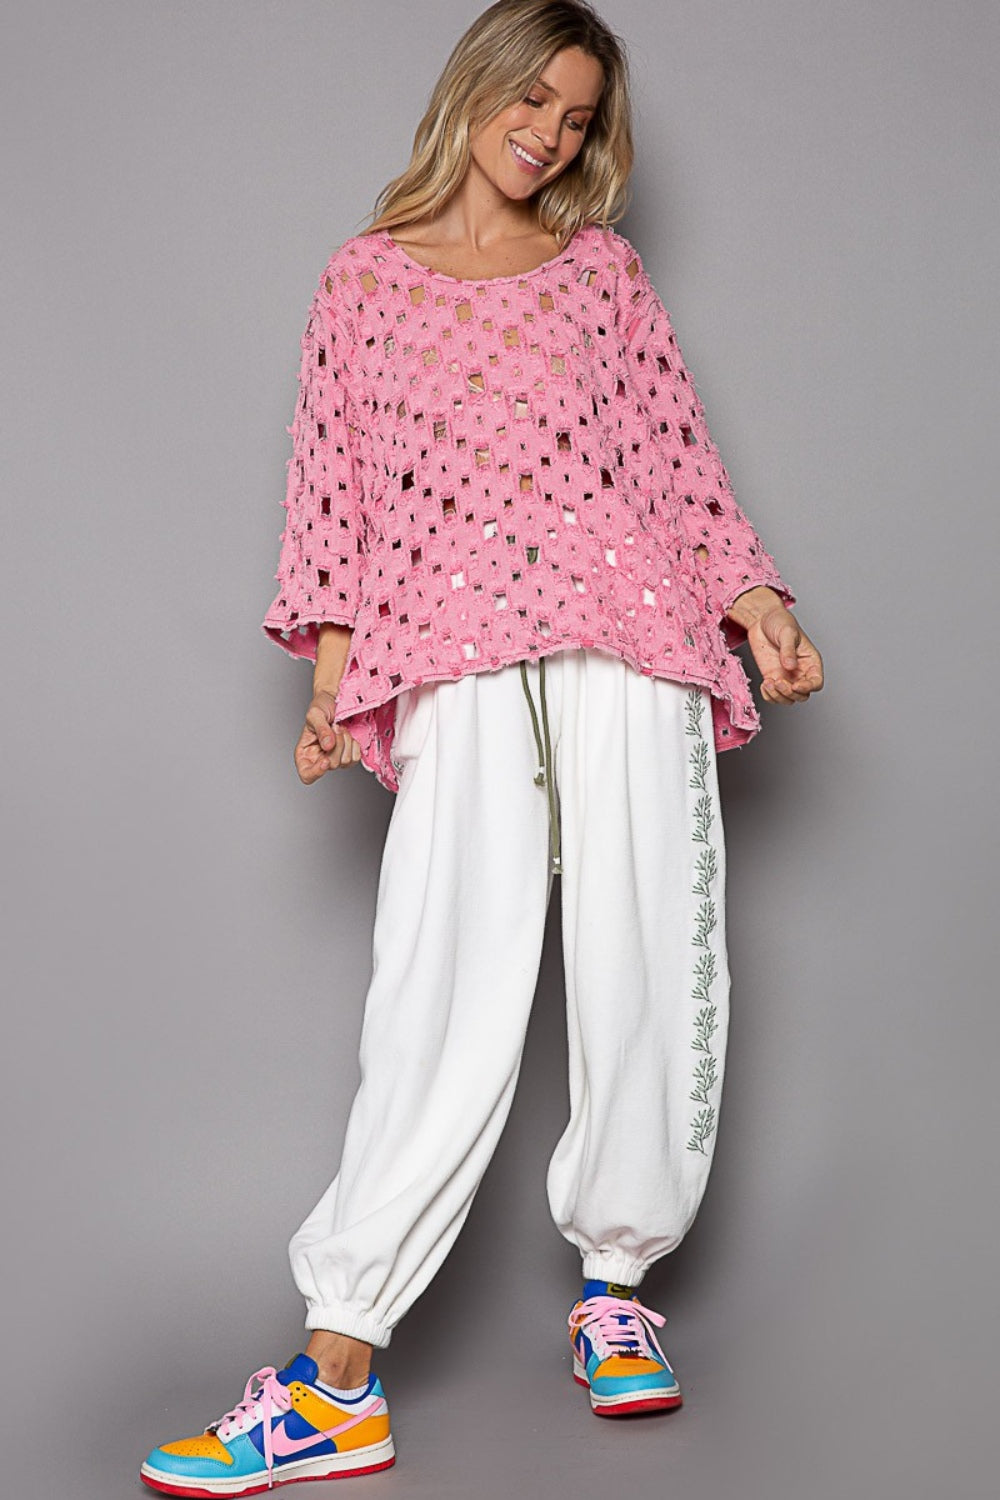 Distressed Openwork Top in Punch Pink